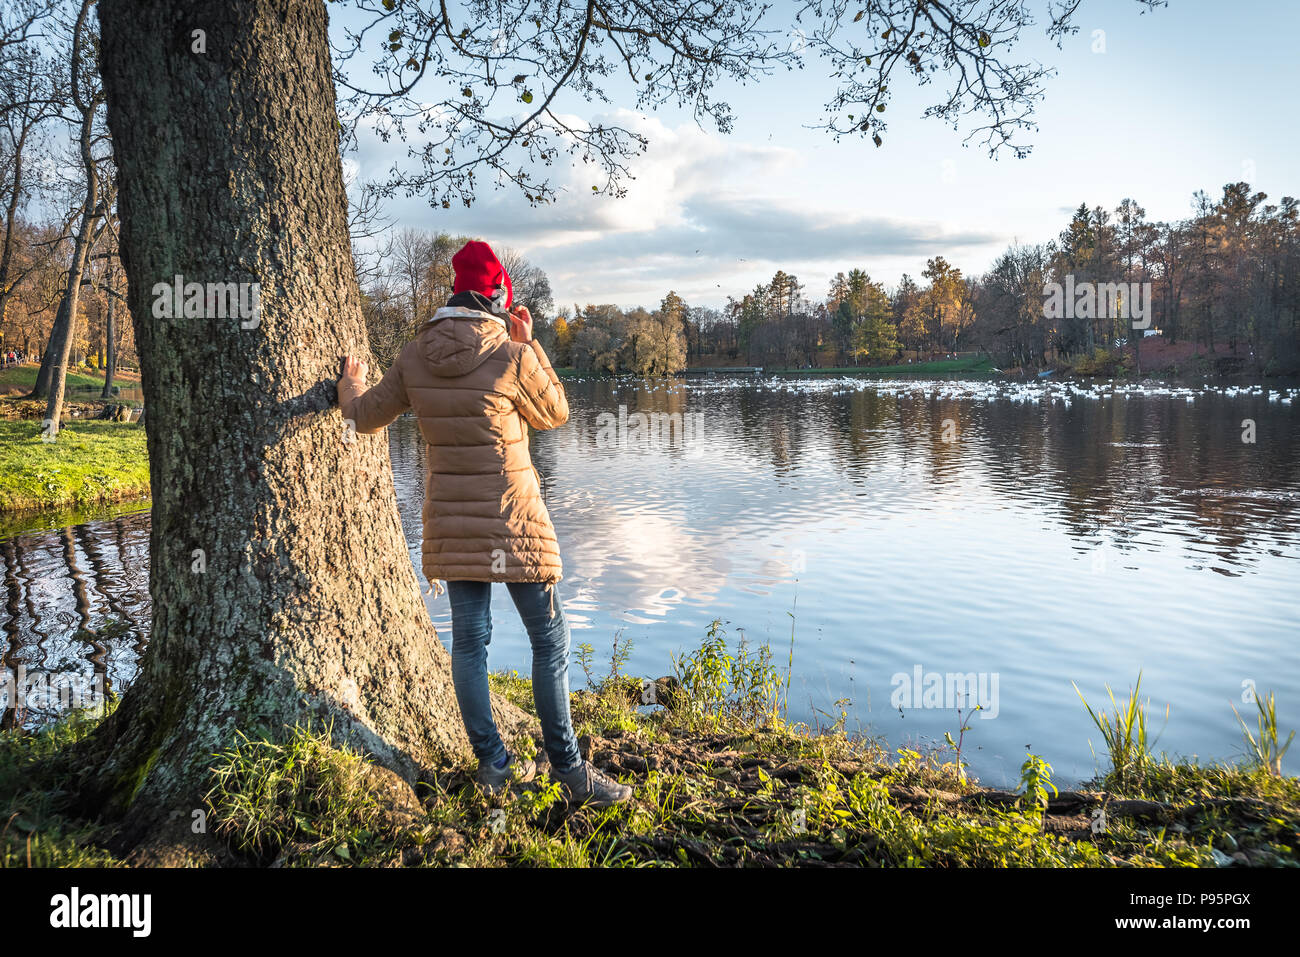 A girl in a red hat wearing headphones enjoys the view of an autumn park. View from the back. Stock Photo